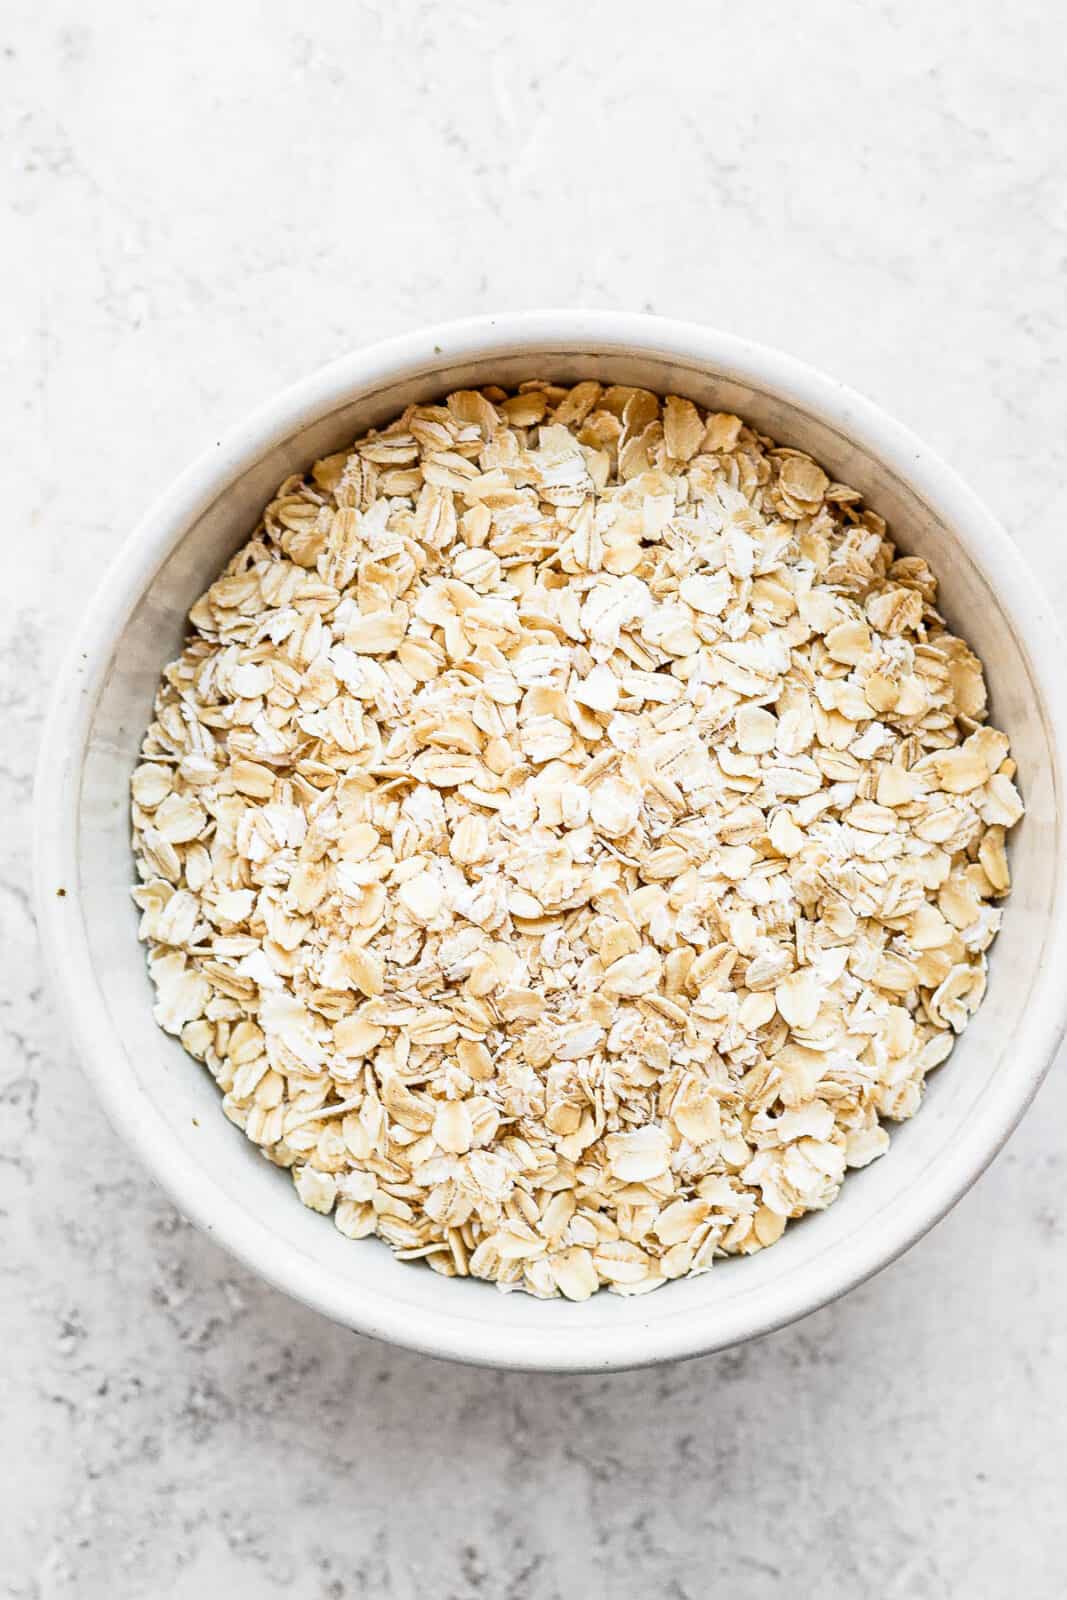 Old-fashioned oats in a bowl.